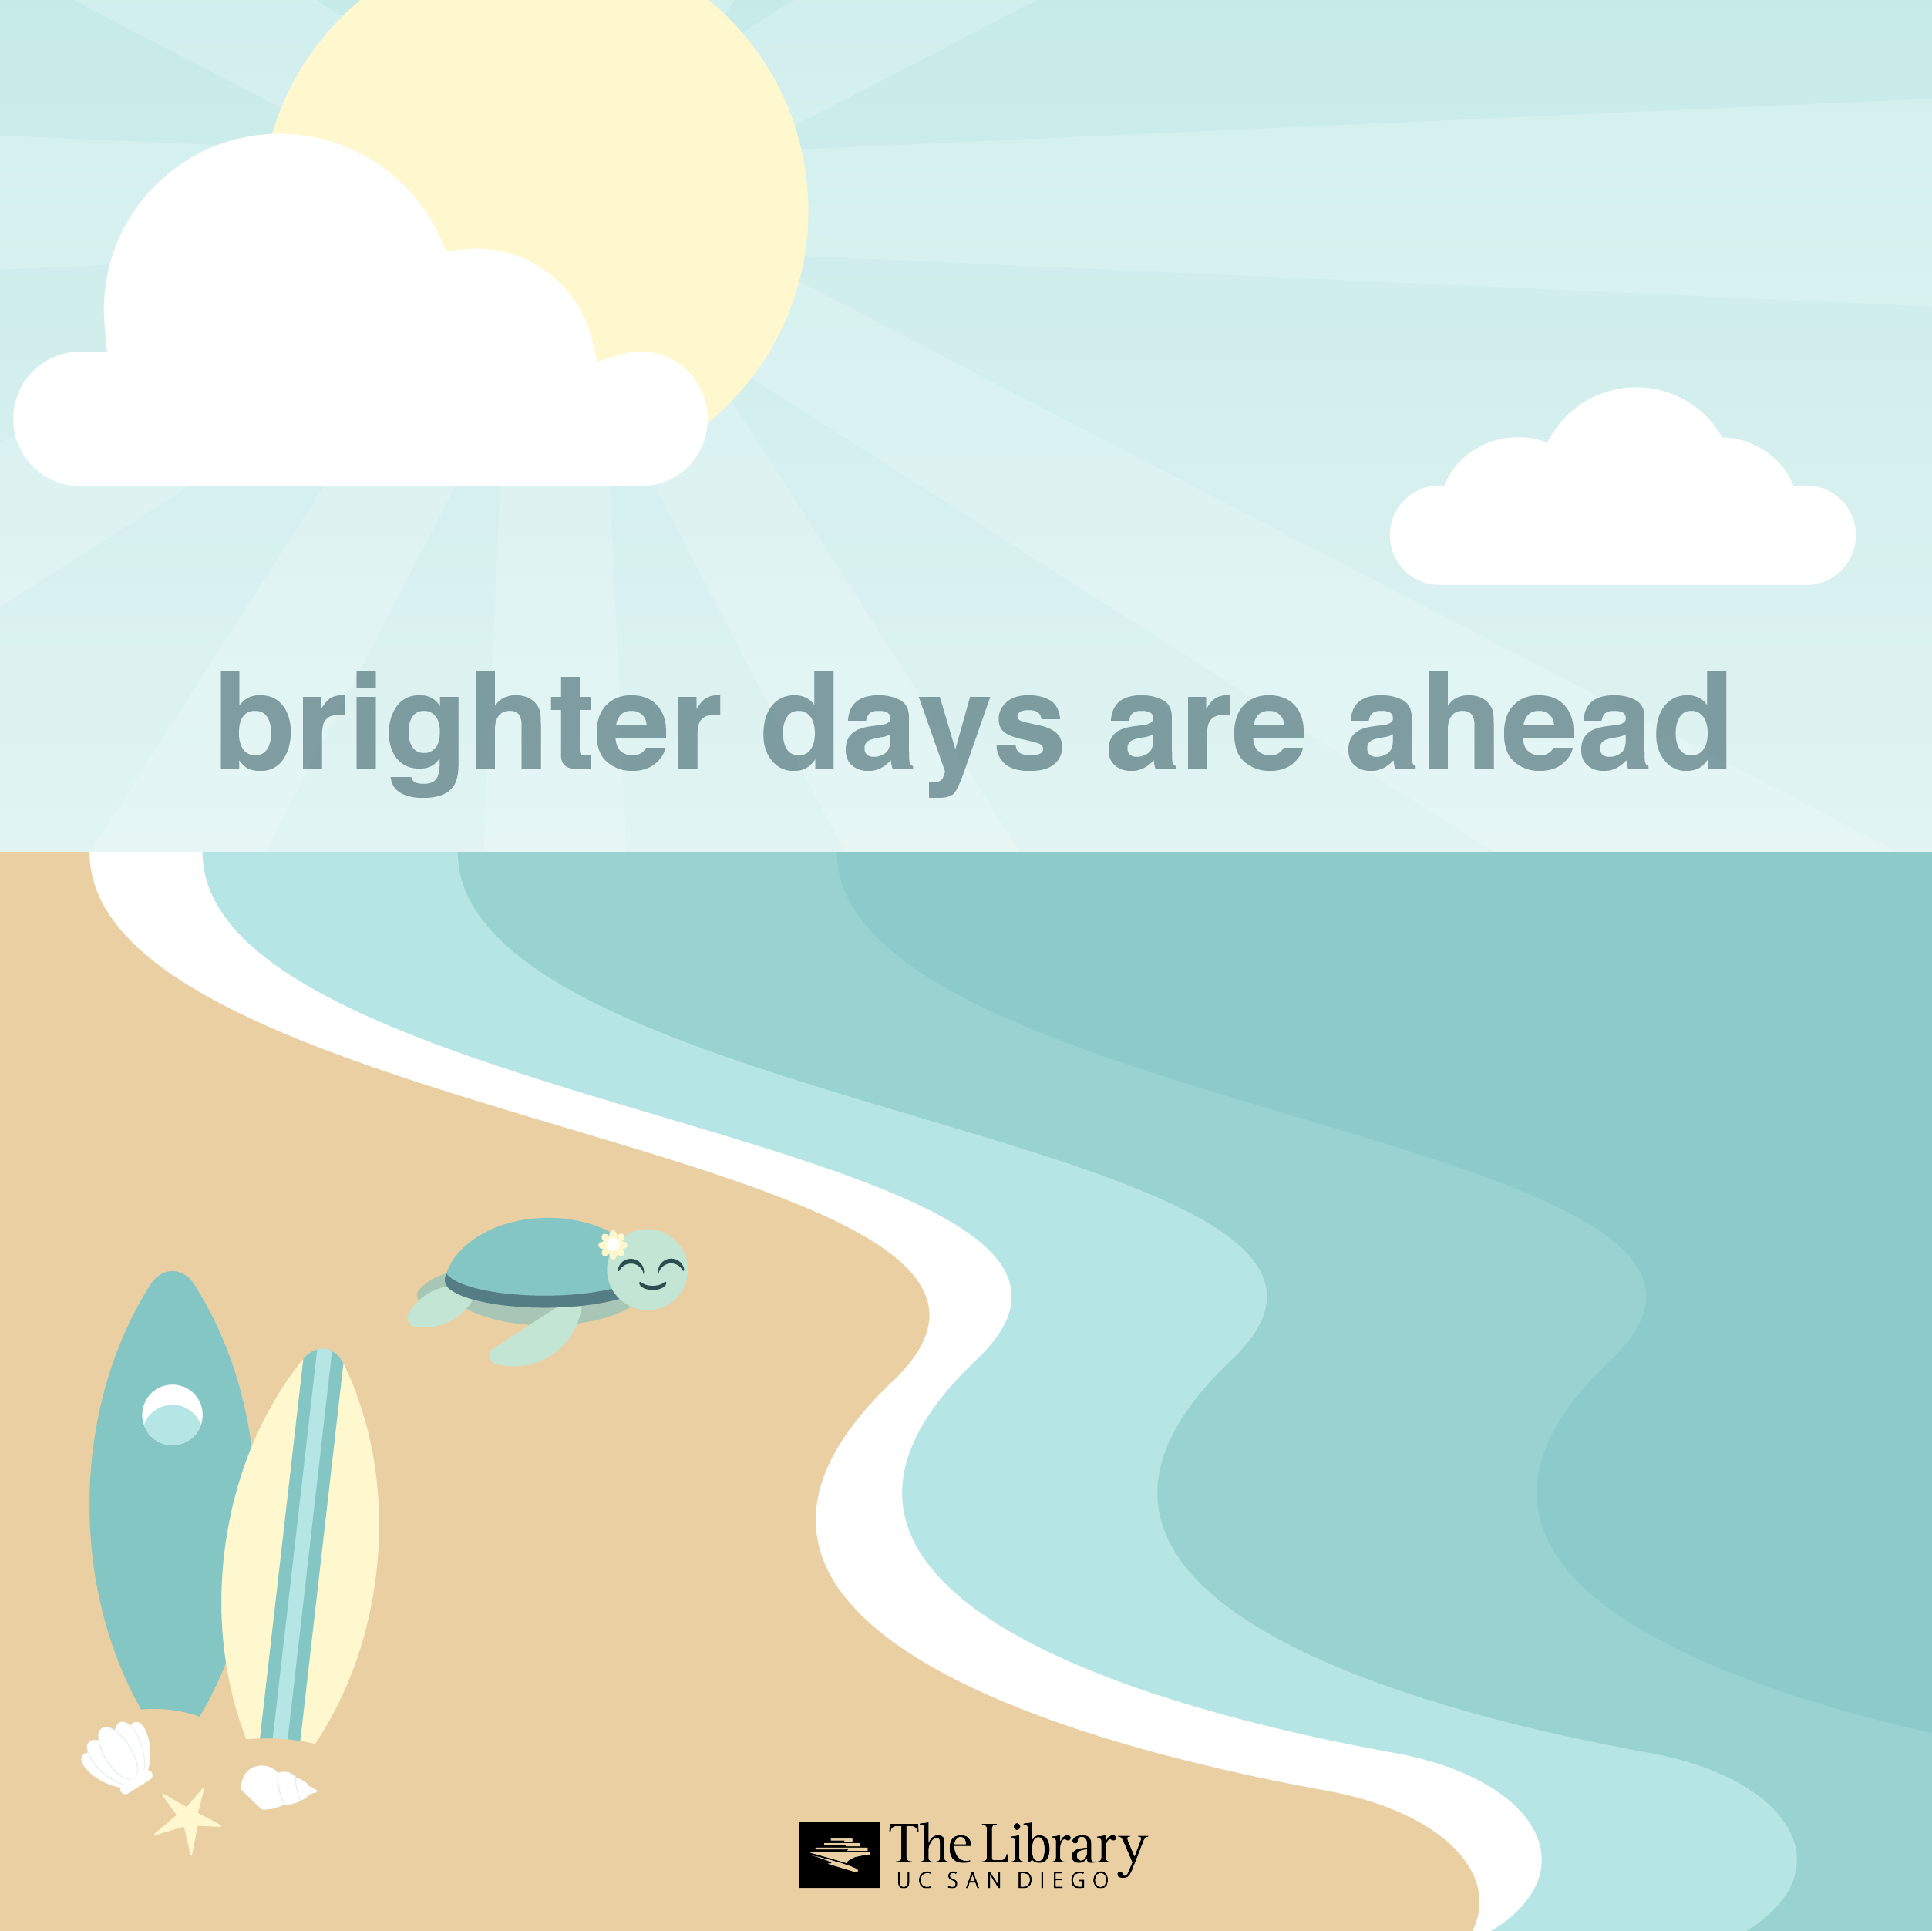 Cartoon smiling turtle relaxing on a beach with sunshine and sea. Text reads "brighter days are ahead"